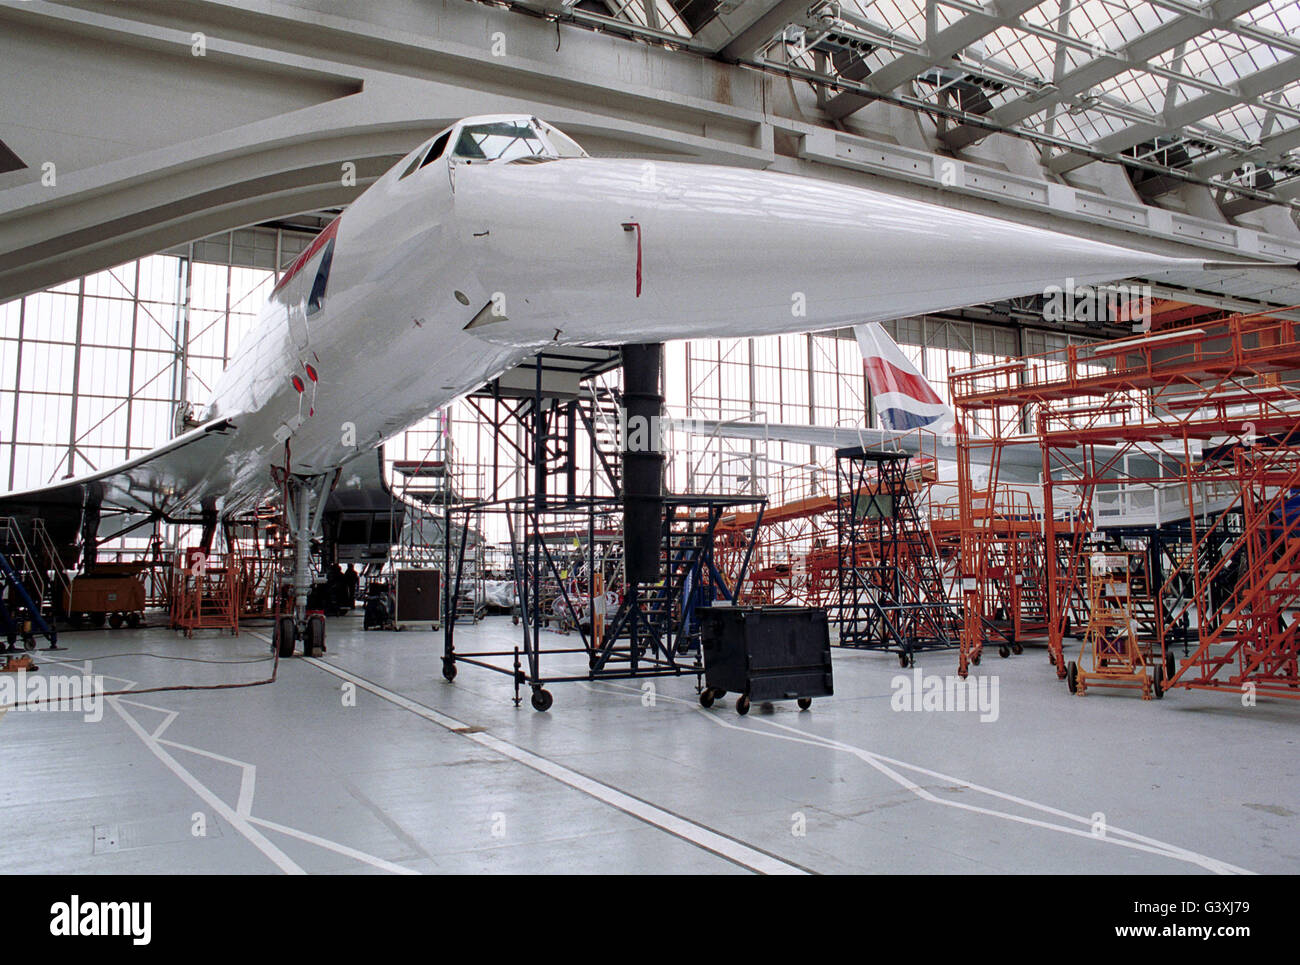 CONCORDE.   Two Concordes in process of being modified in a hanger at Heathrow Airport, London today March 23rd 2001. Stock Photo